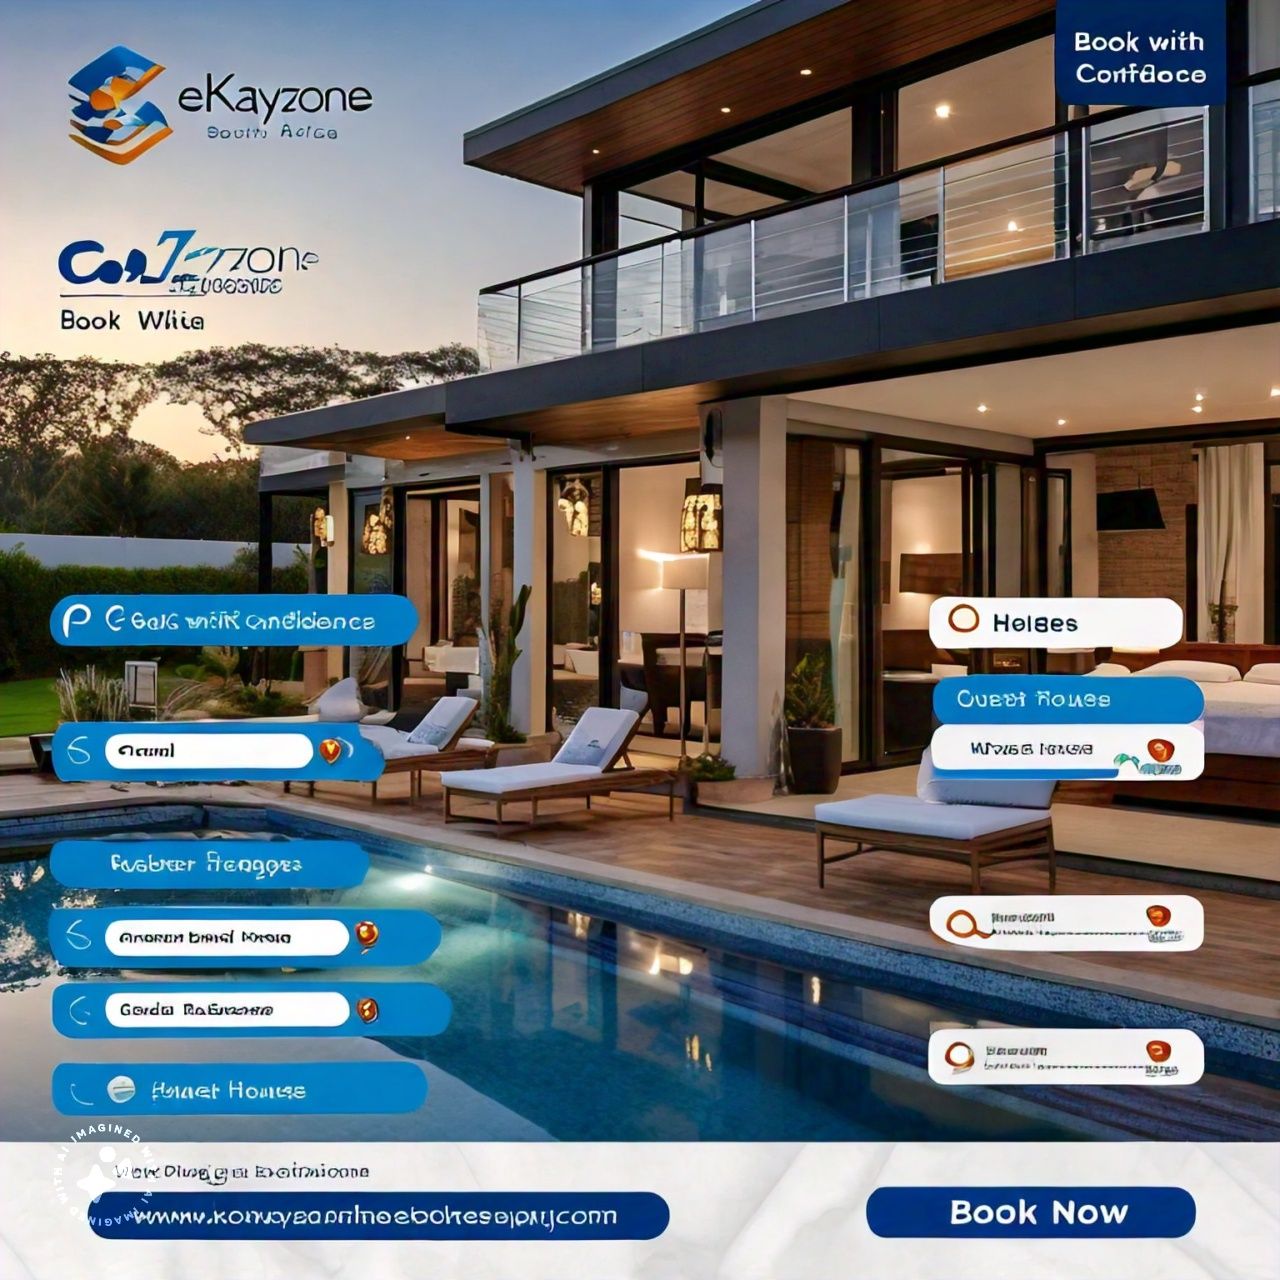 Booking eKayzoen South Africa- Hotel Booking or Advertisements